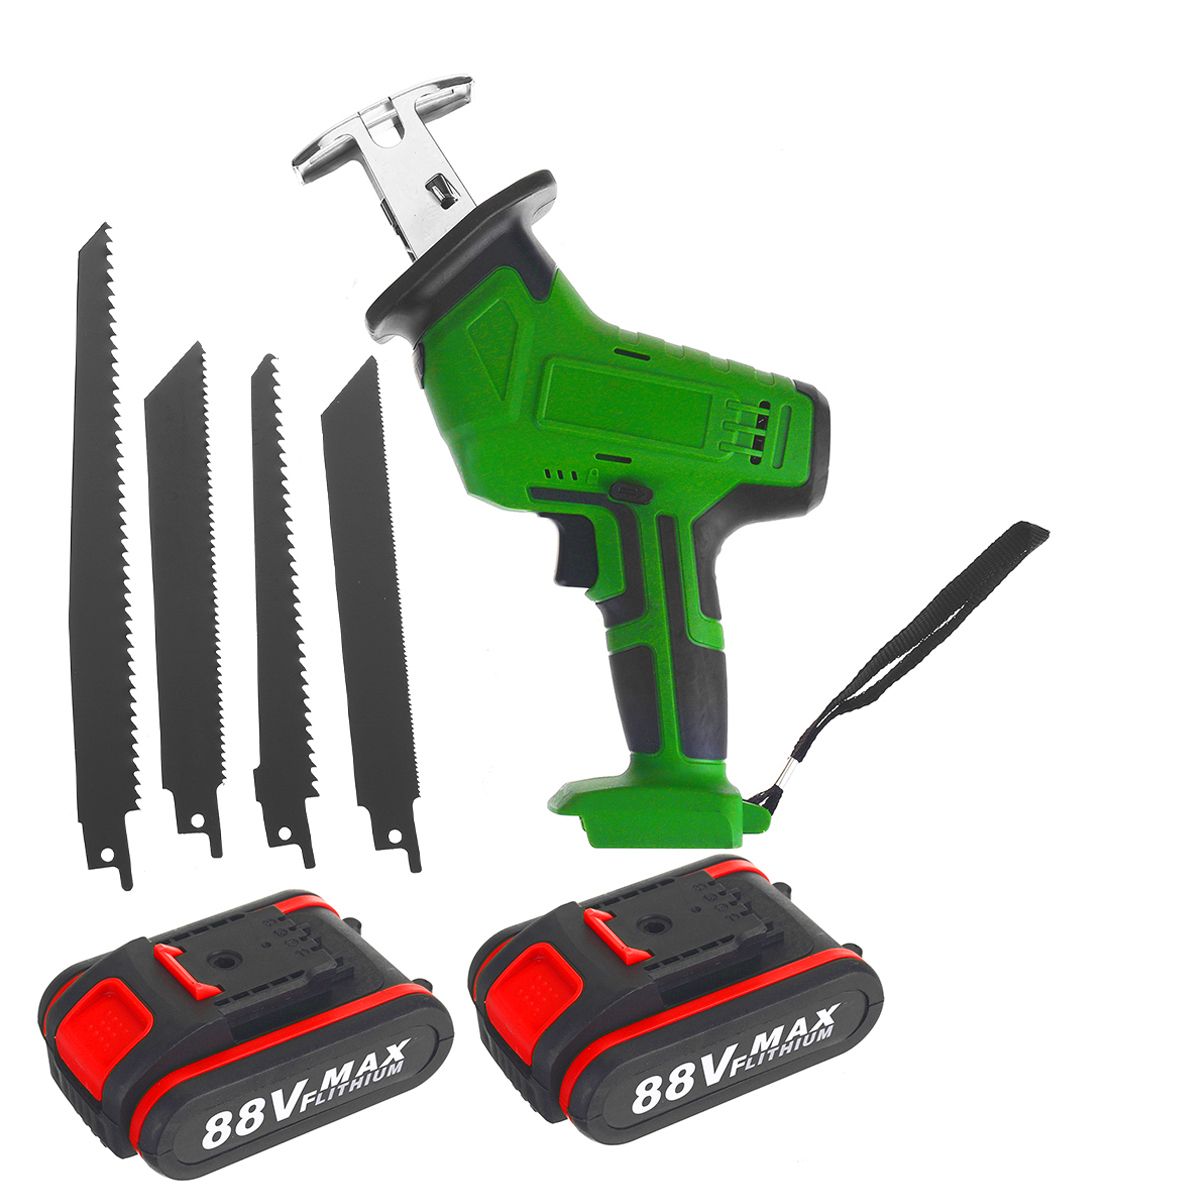 88VF-Electric-Reciprocating-Saw-Wireless-Rechargeable-Saw-Wood-Metal-Plastic-Sawing-Cutting-Tool-1765151